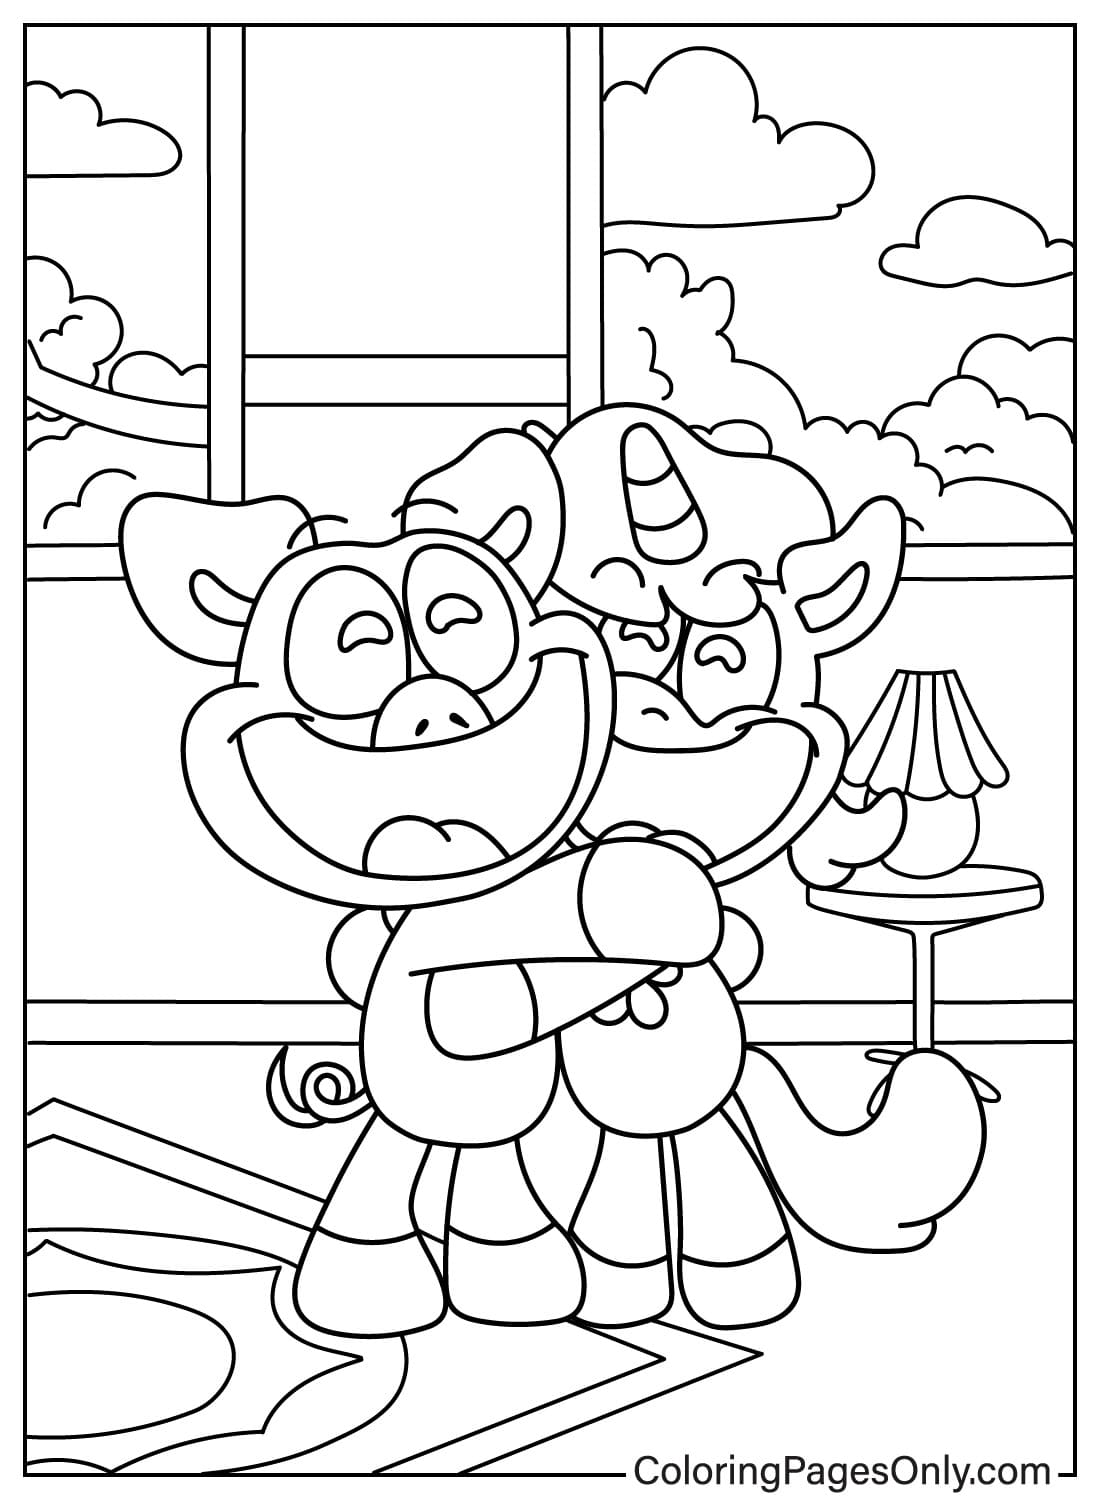 PickyPiggy and CraftyCorn Coloring Page for Kids from PickyPiggy